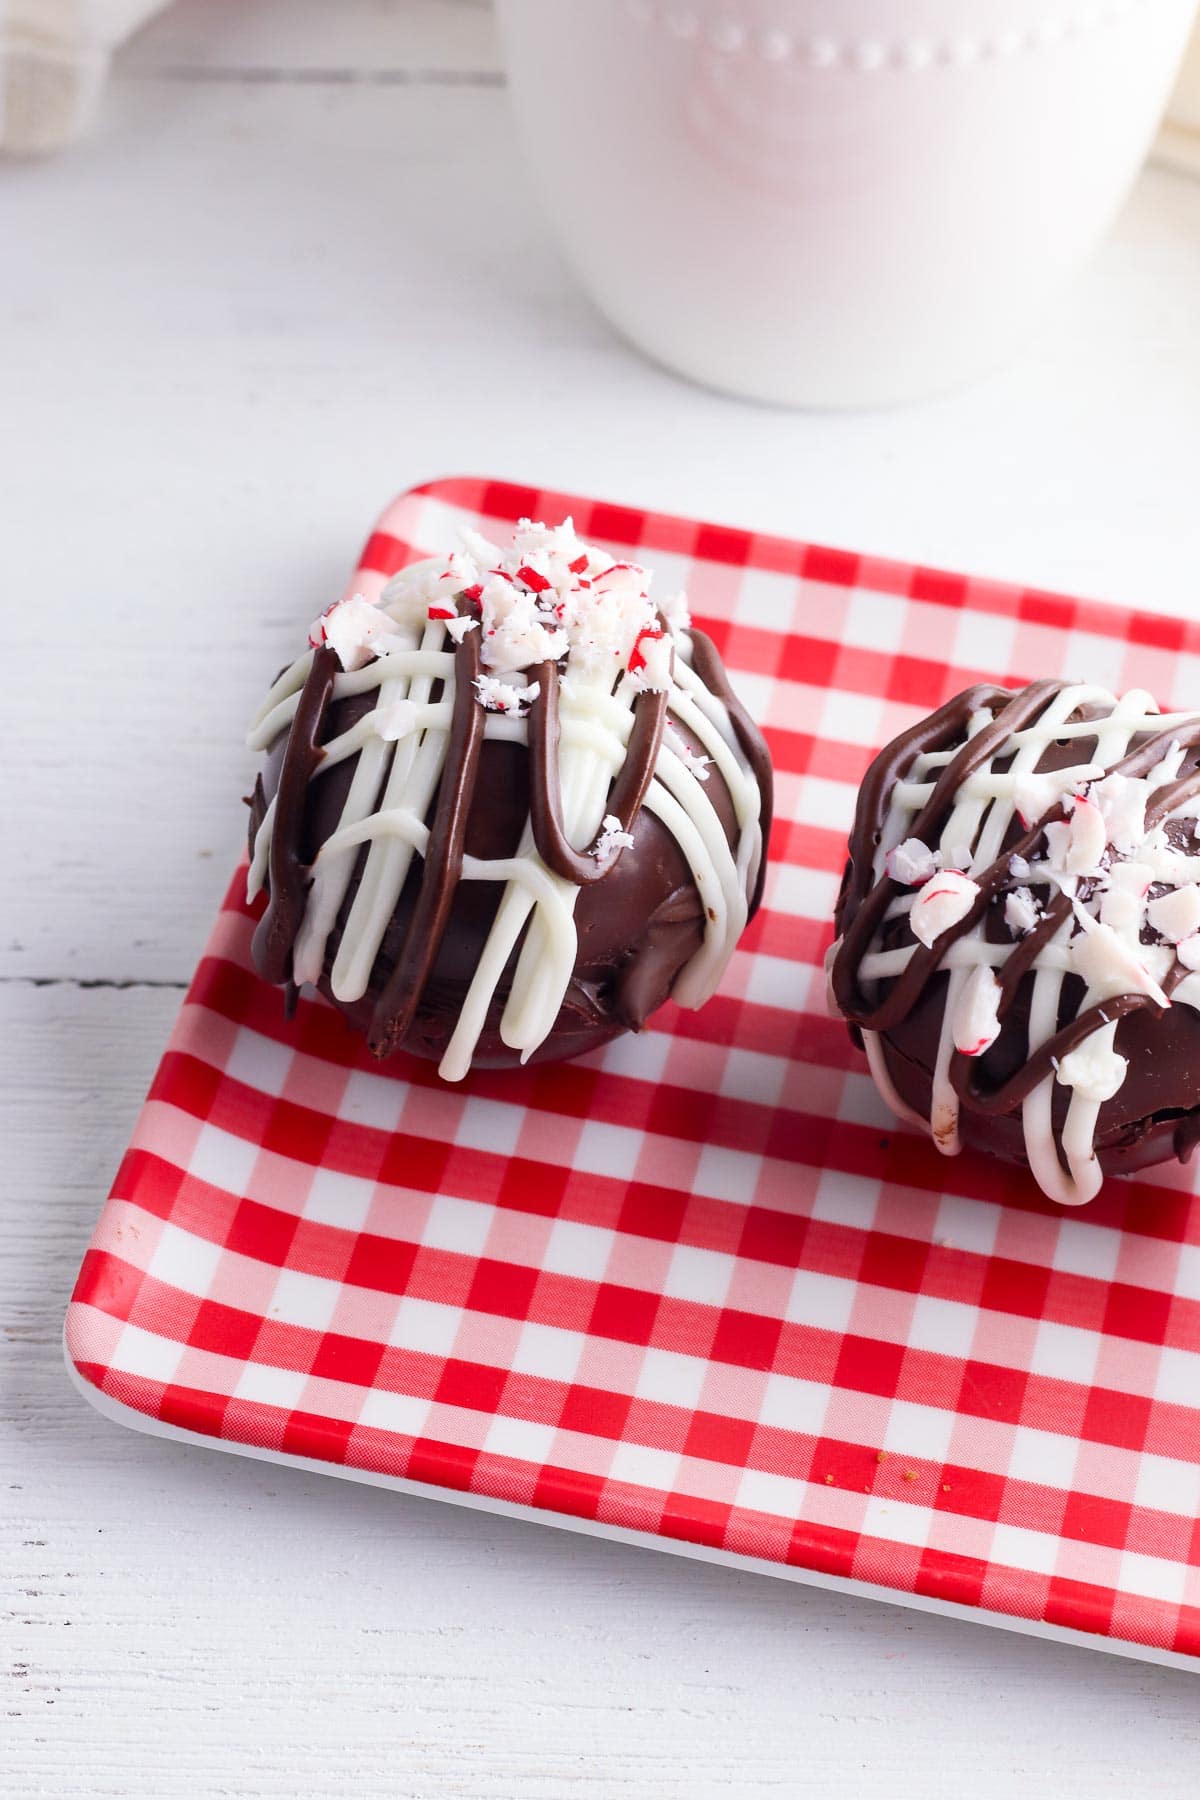 Peppermint Hot Chocolate Bombs on checked plate 